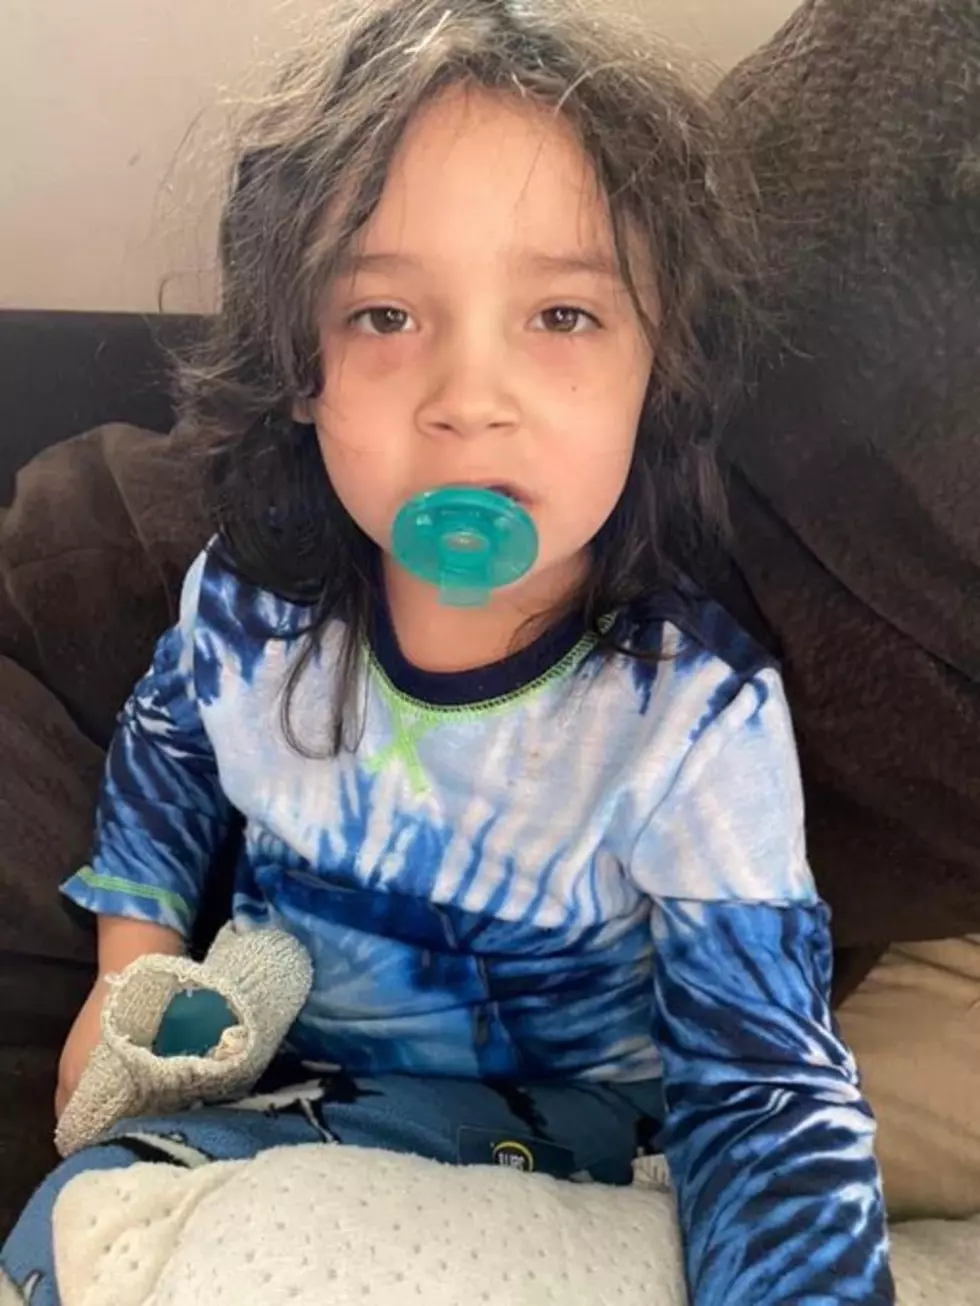 Statewide Alert for Missing Yakima 4-Year-Old